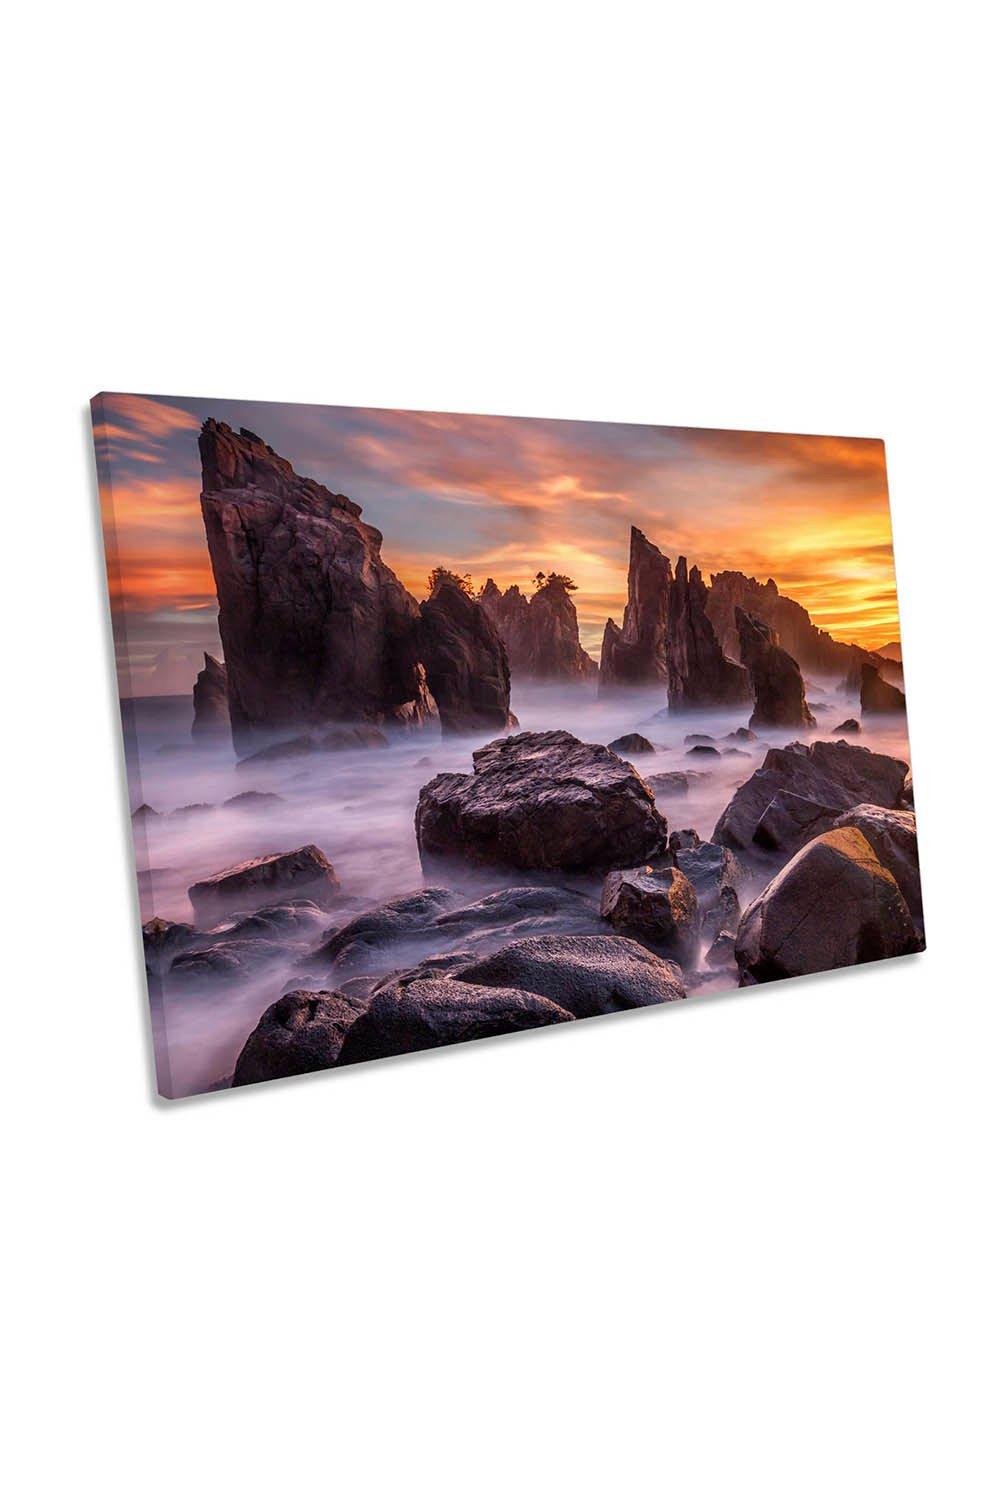 Heavens of Rocks Sunset Canvas Wall Art Picture Print